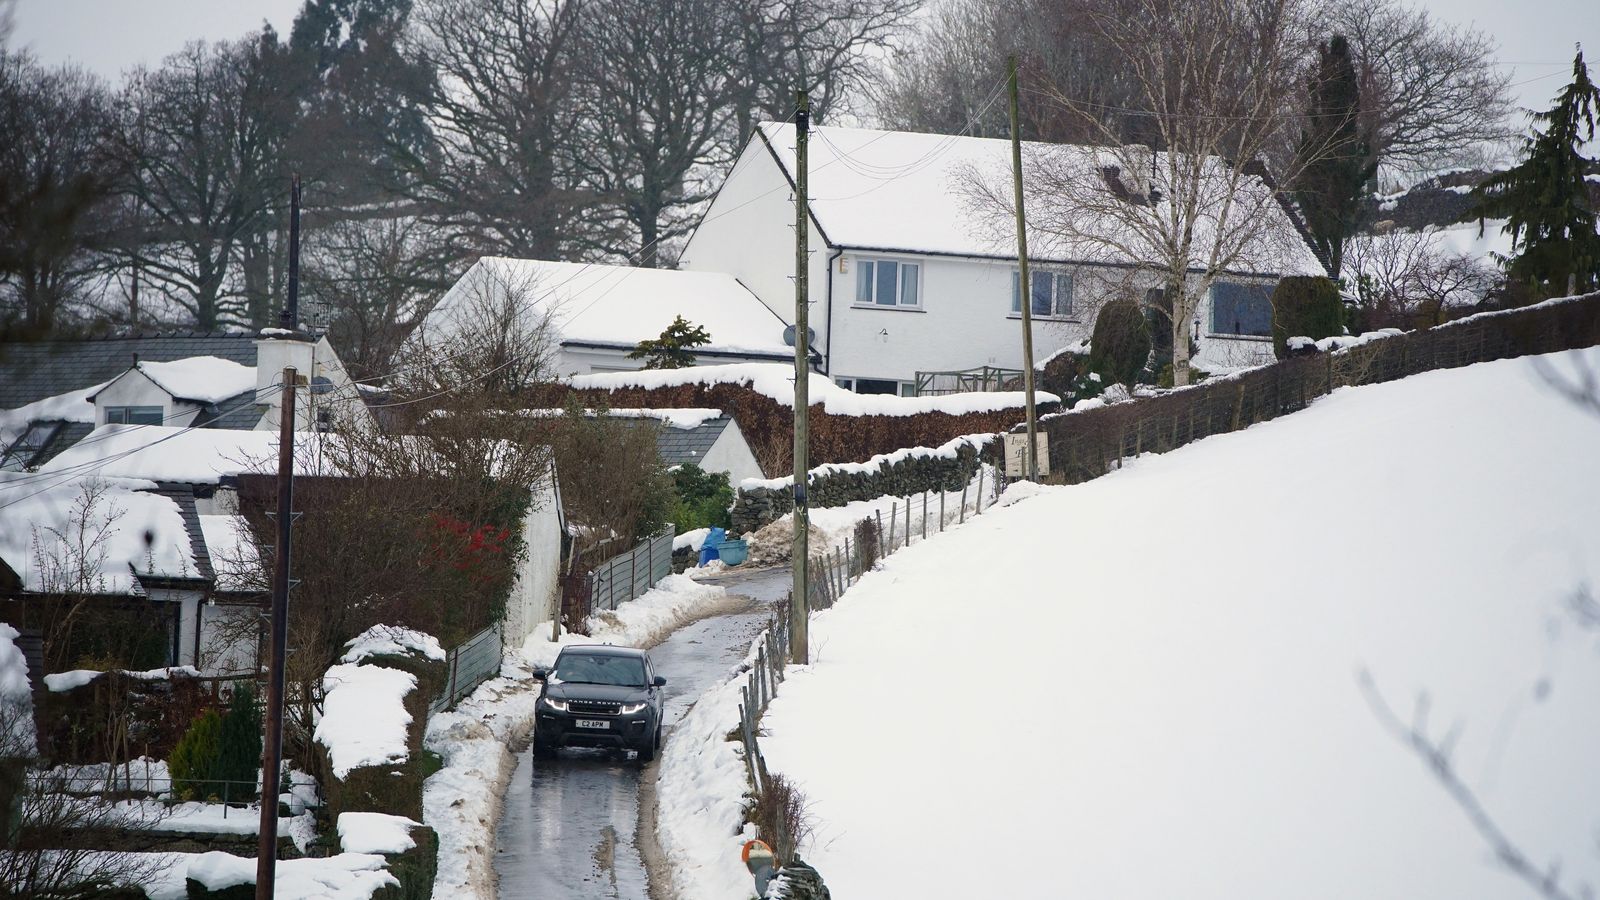 UK weather: Snow on the way as amber cold-health alert issued for parts of England